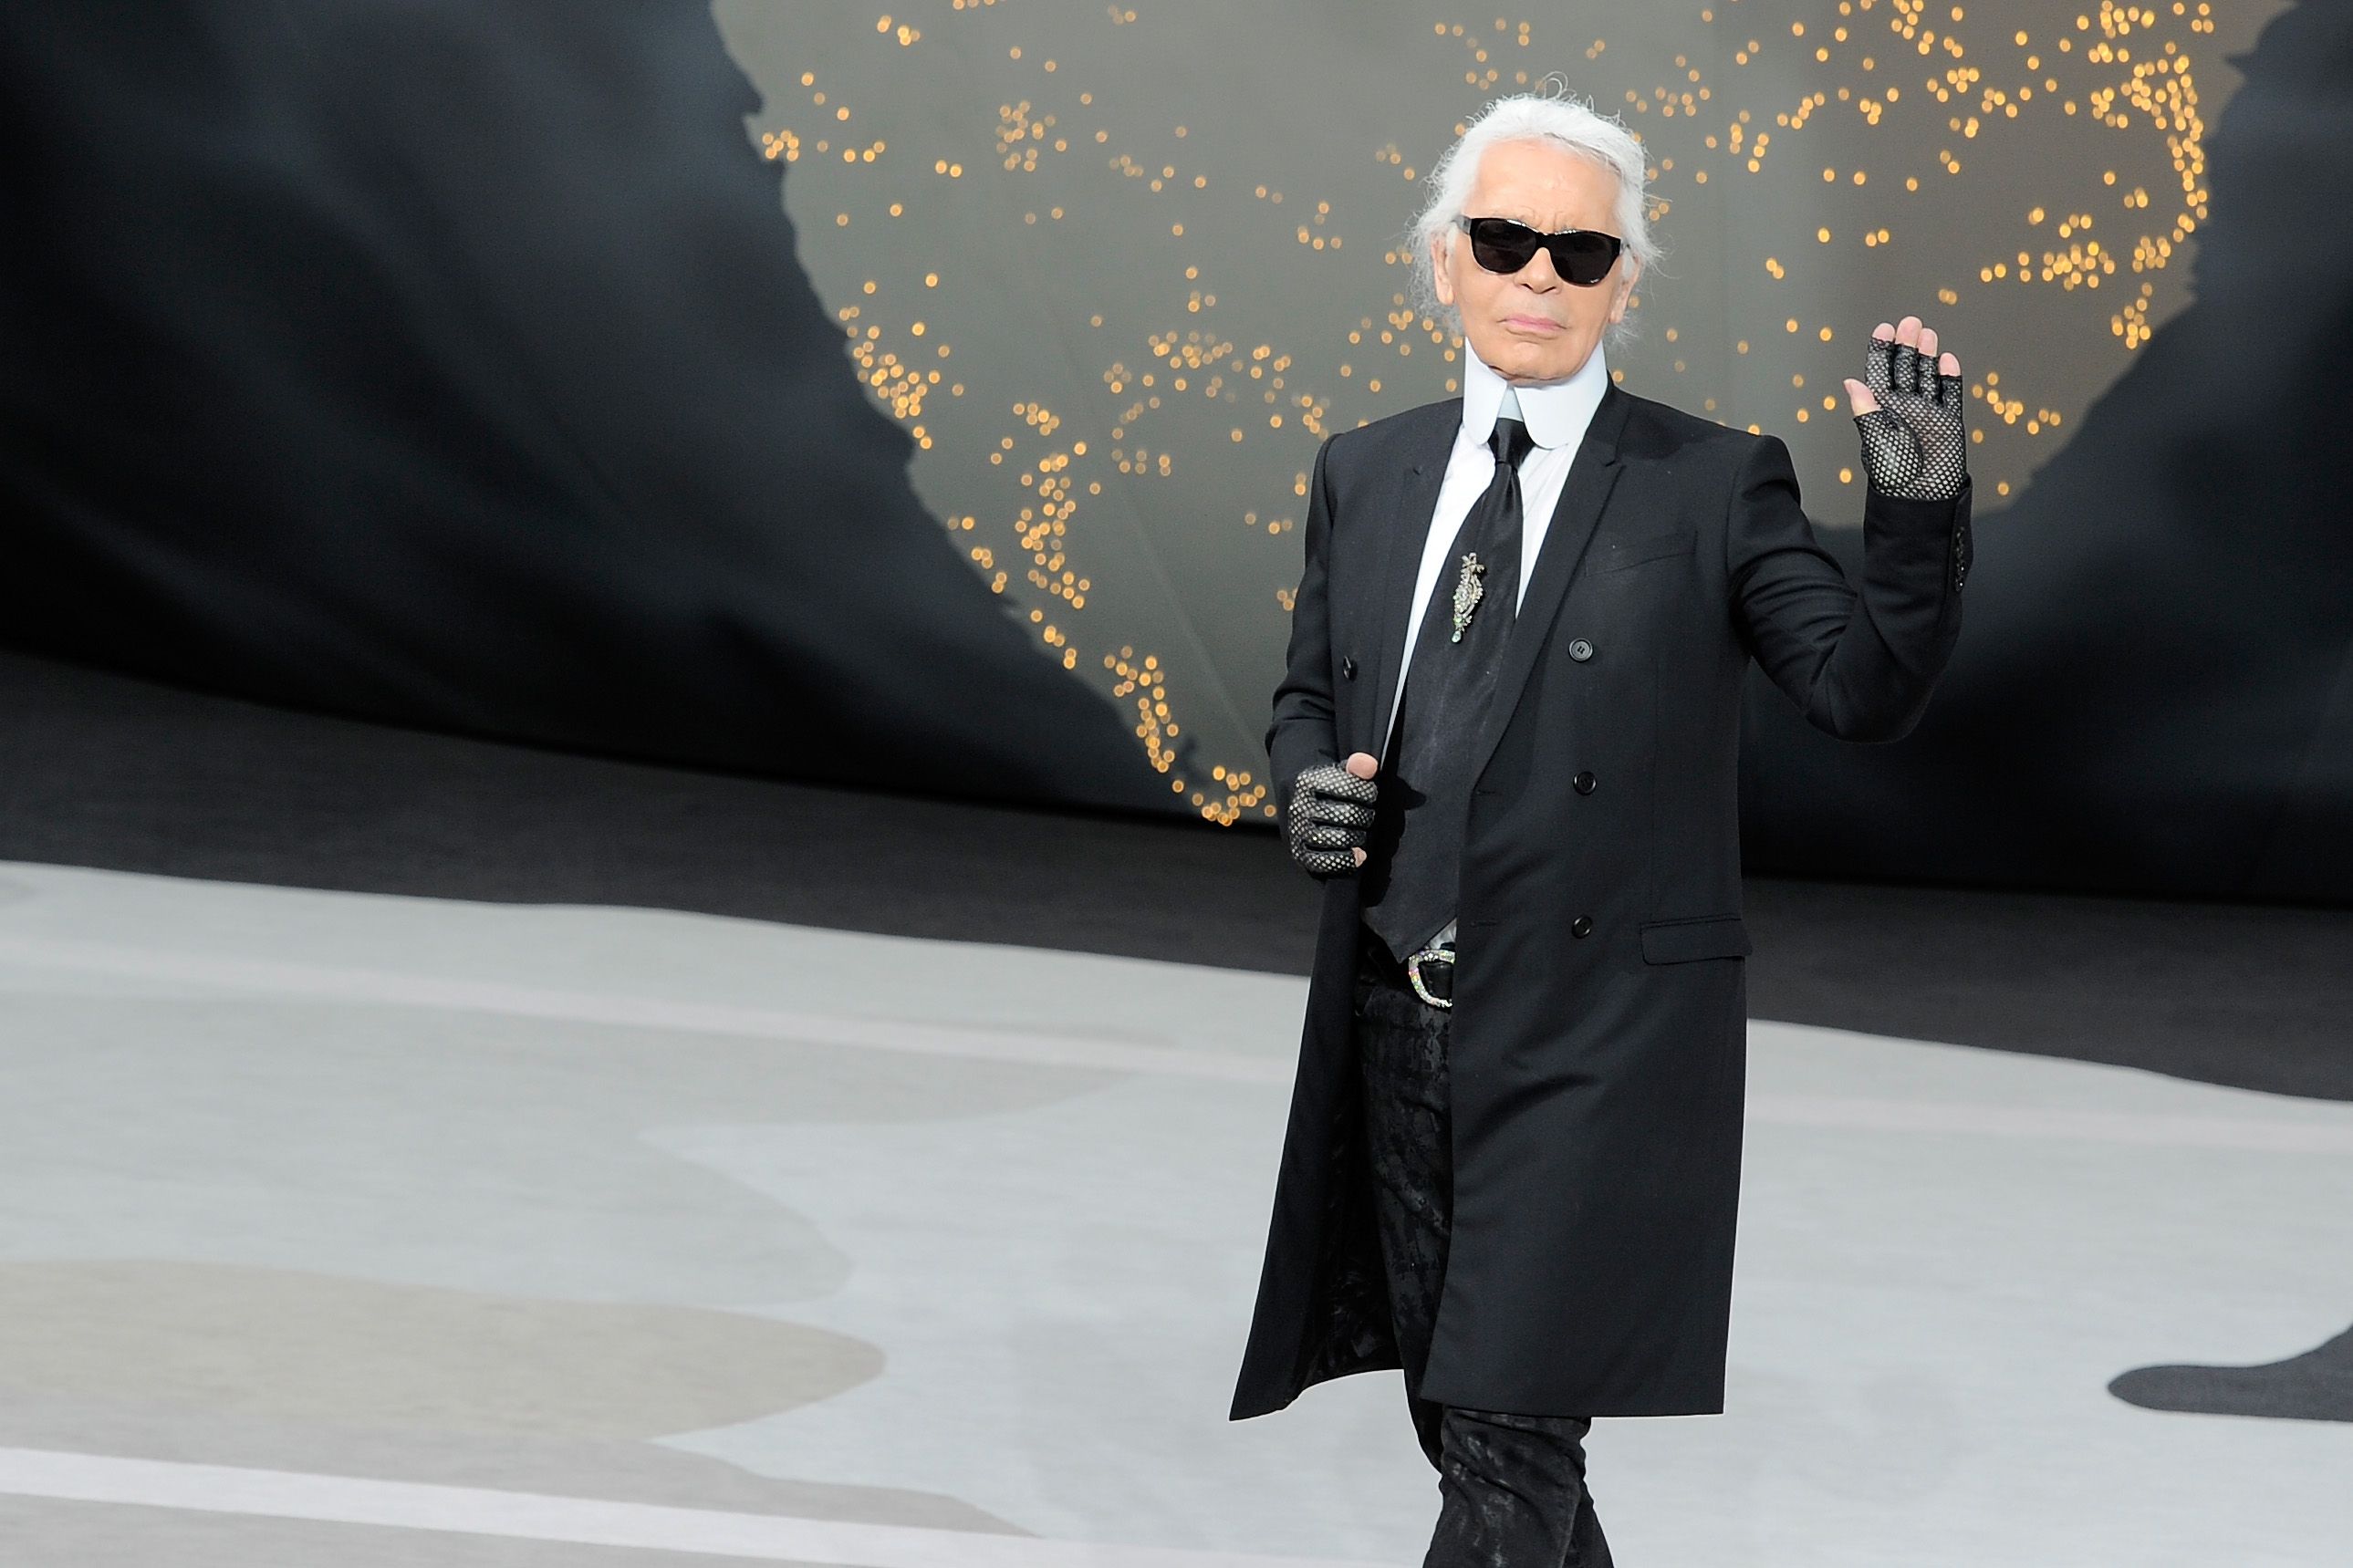 Karl Lagerfeld Best Quotes - 9 Quotes from Karl Lagerfeld, Iconic